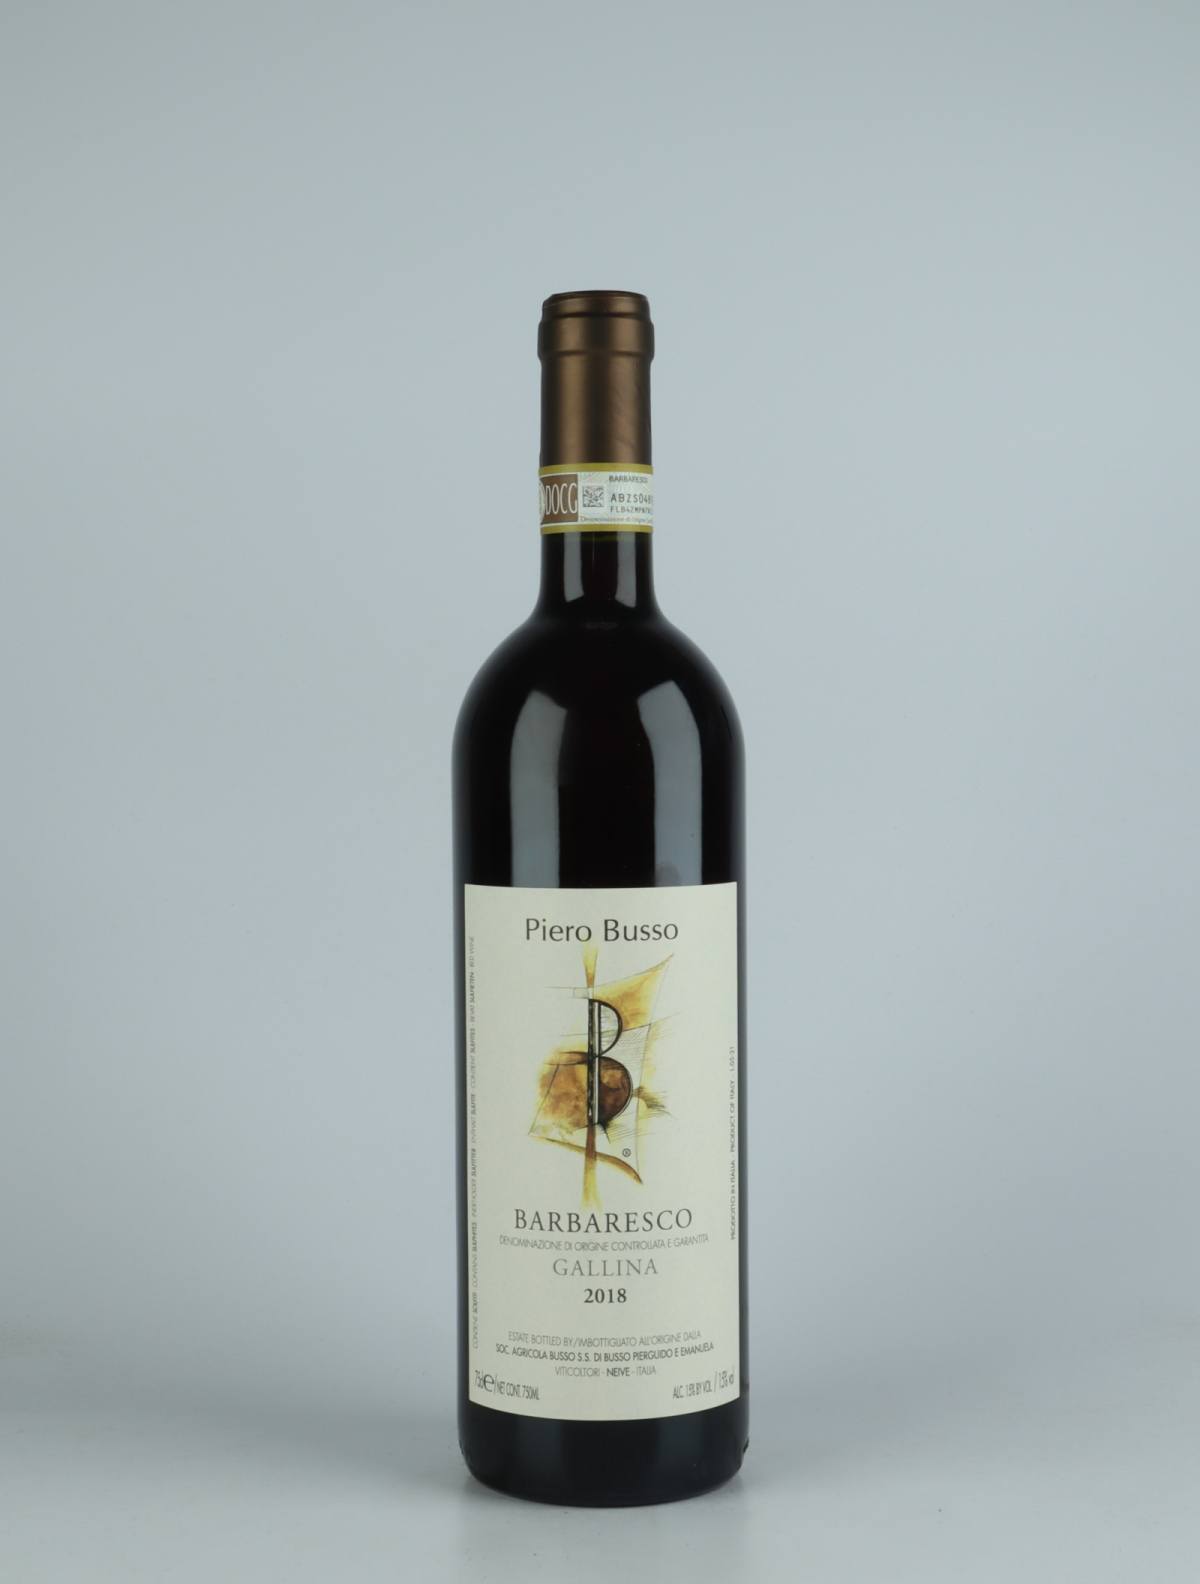 A bottle 2018 Barbaresco Gallina Red wine from Piero Busso, Piedmont in Italy